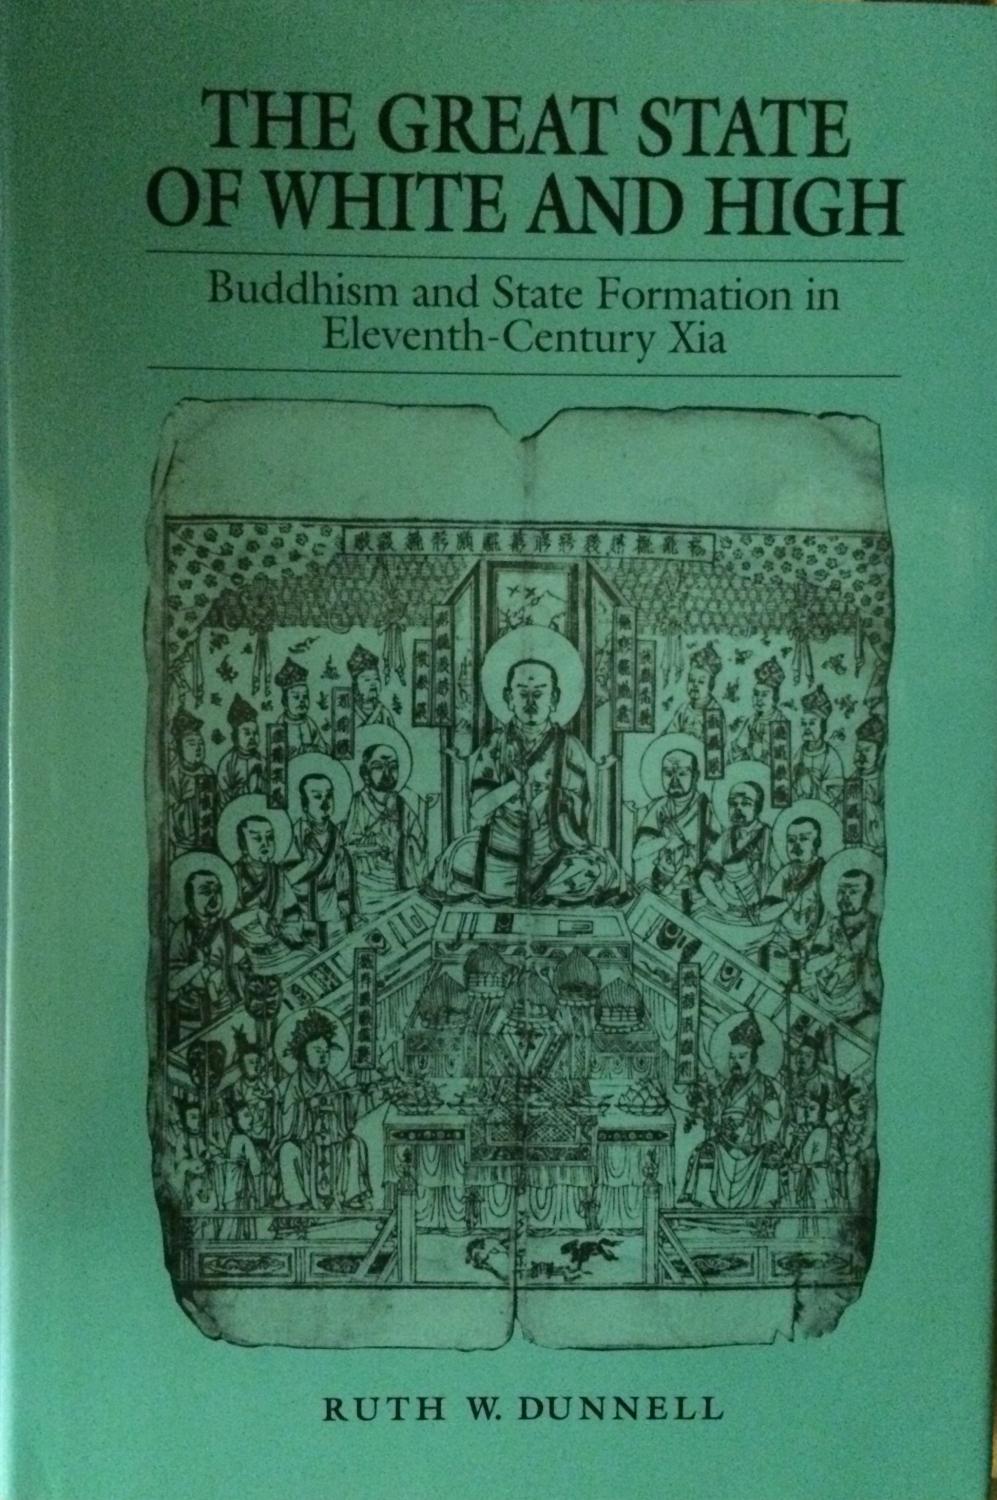 The Great State of White and High: Buddhism and State Formation in Eleventh-century Xia